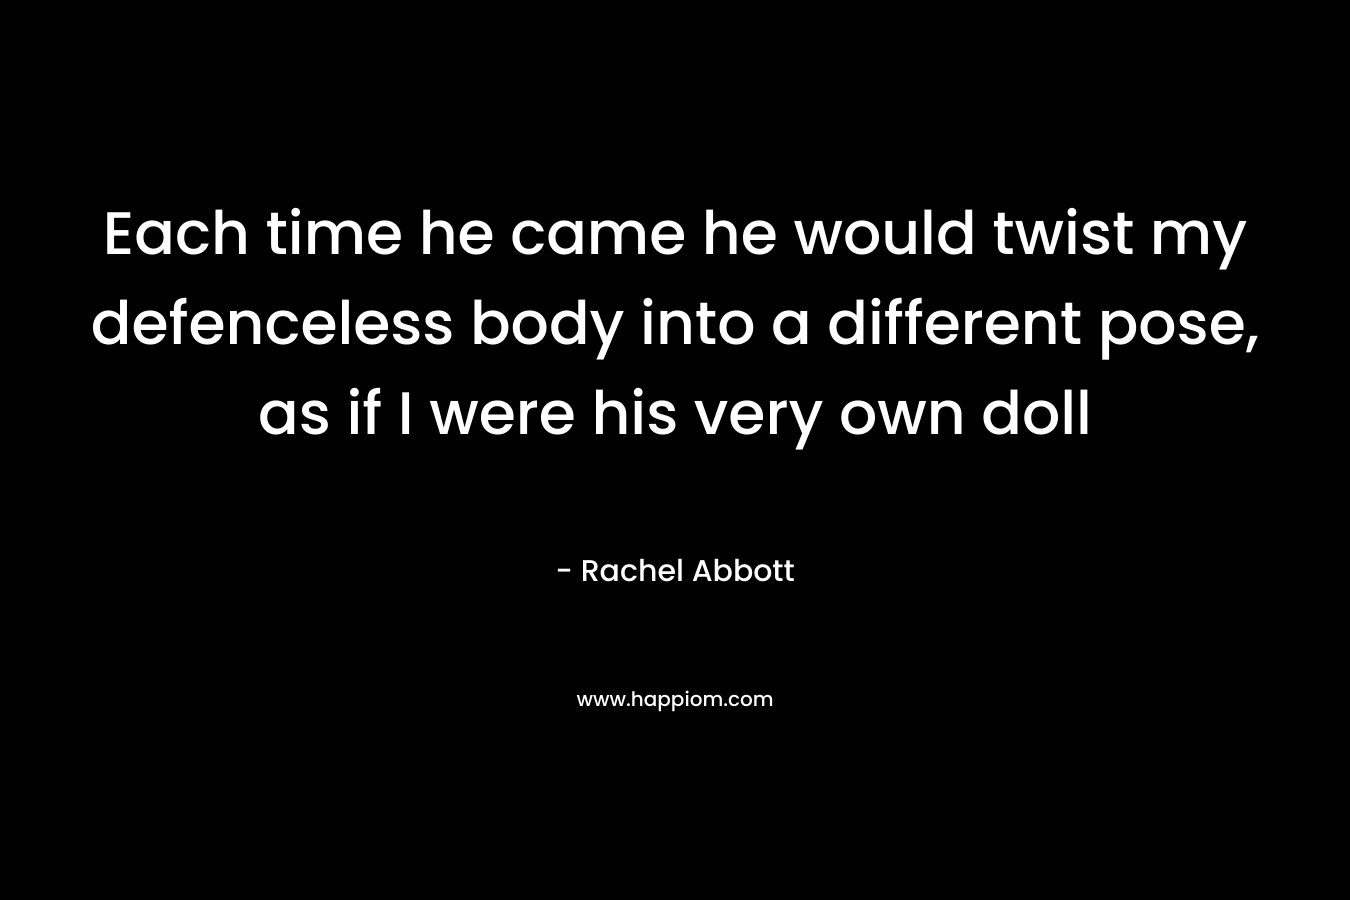 Each time he came he would twist my defenceless body into a different pose, as if I were his very own doll